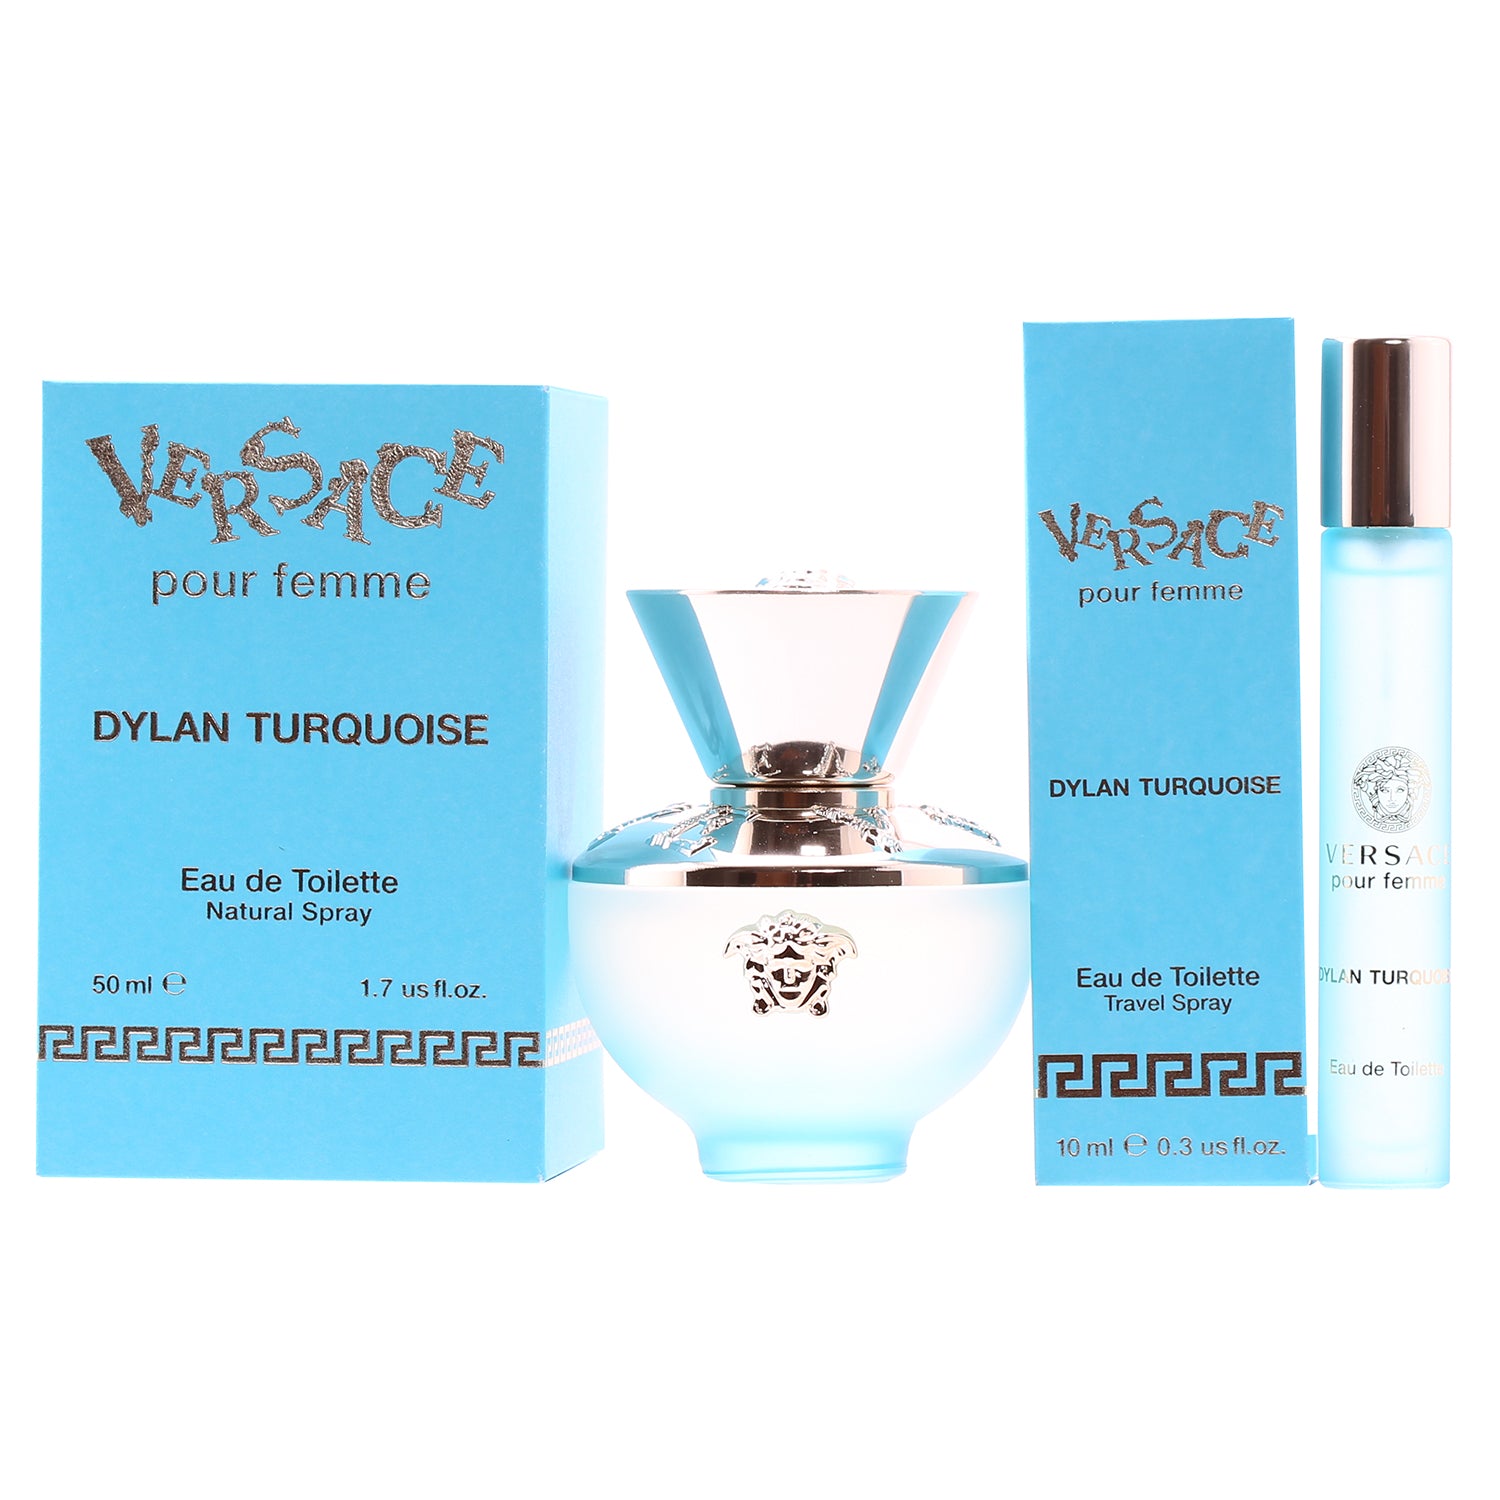 VERSACE DYLAN TURQUOISE .3 OZ EDT/ 1.7 OZ EDT DUO – Charming Charlie